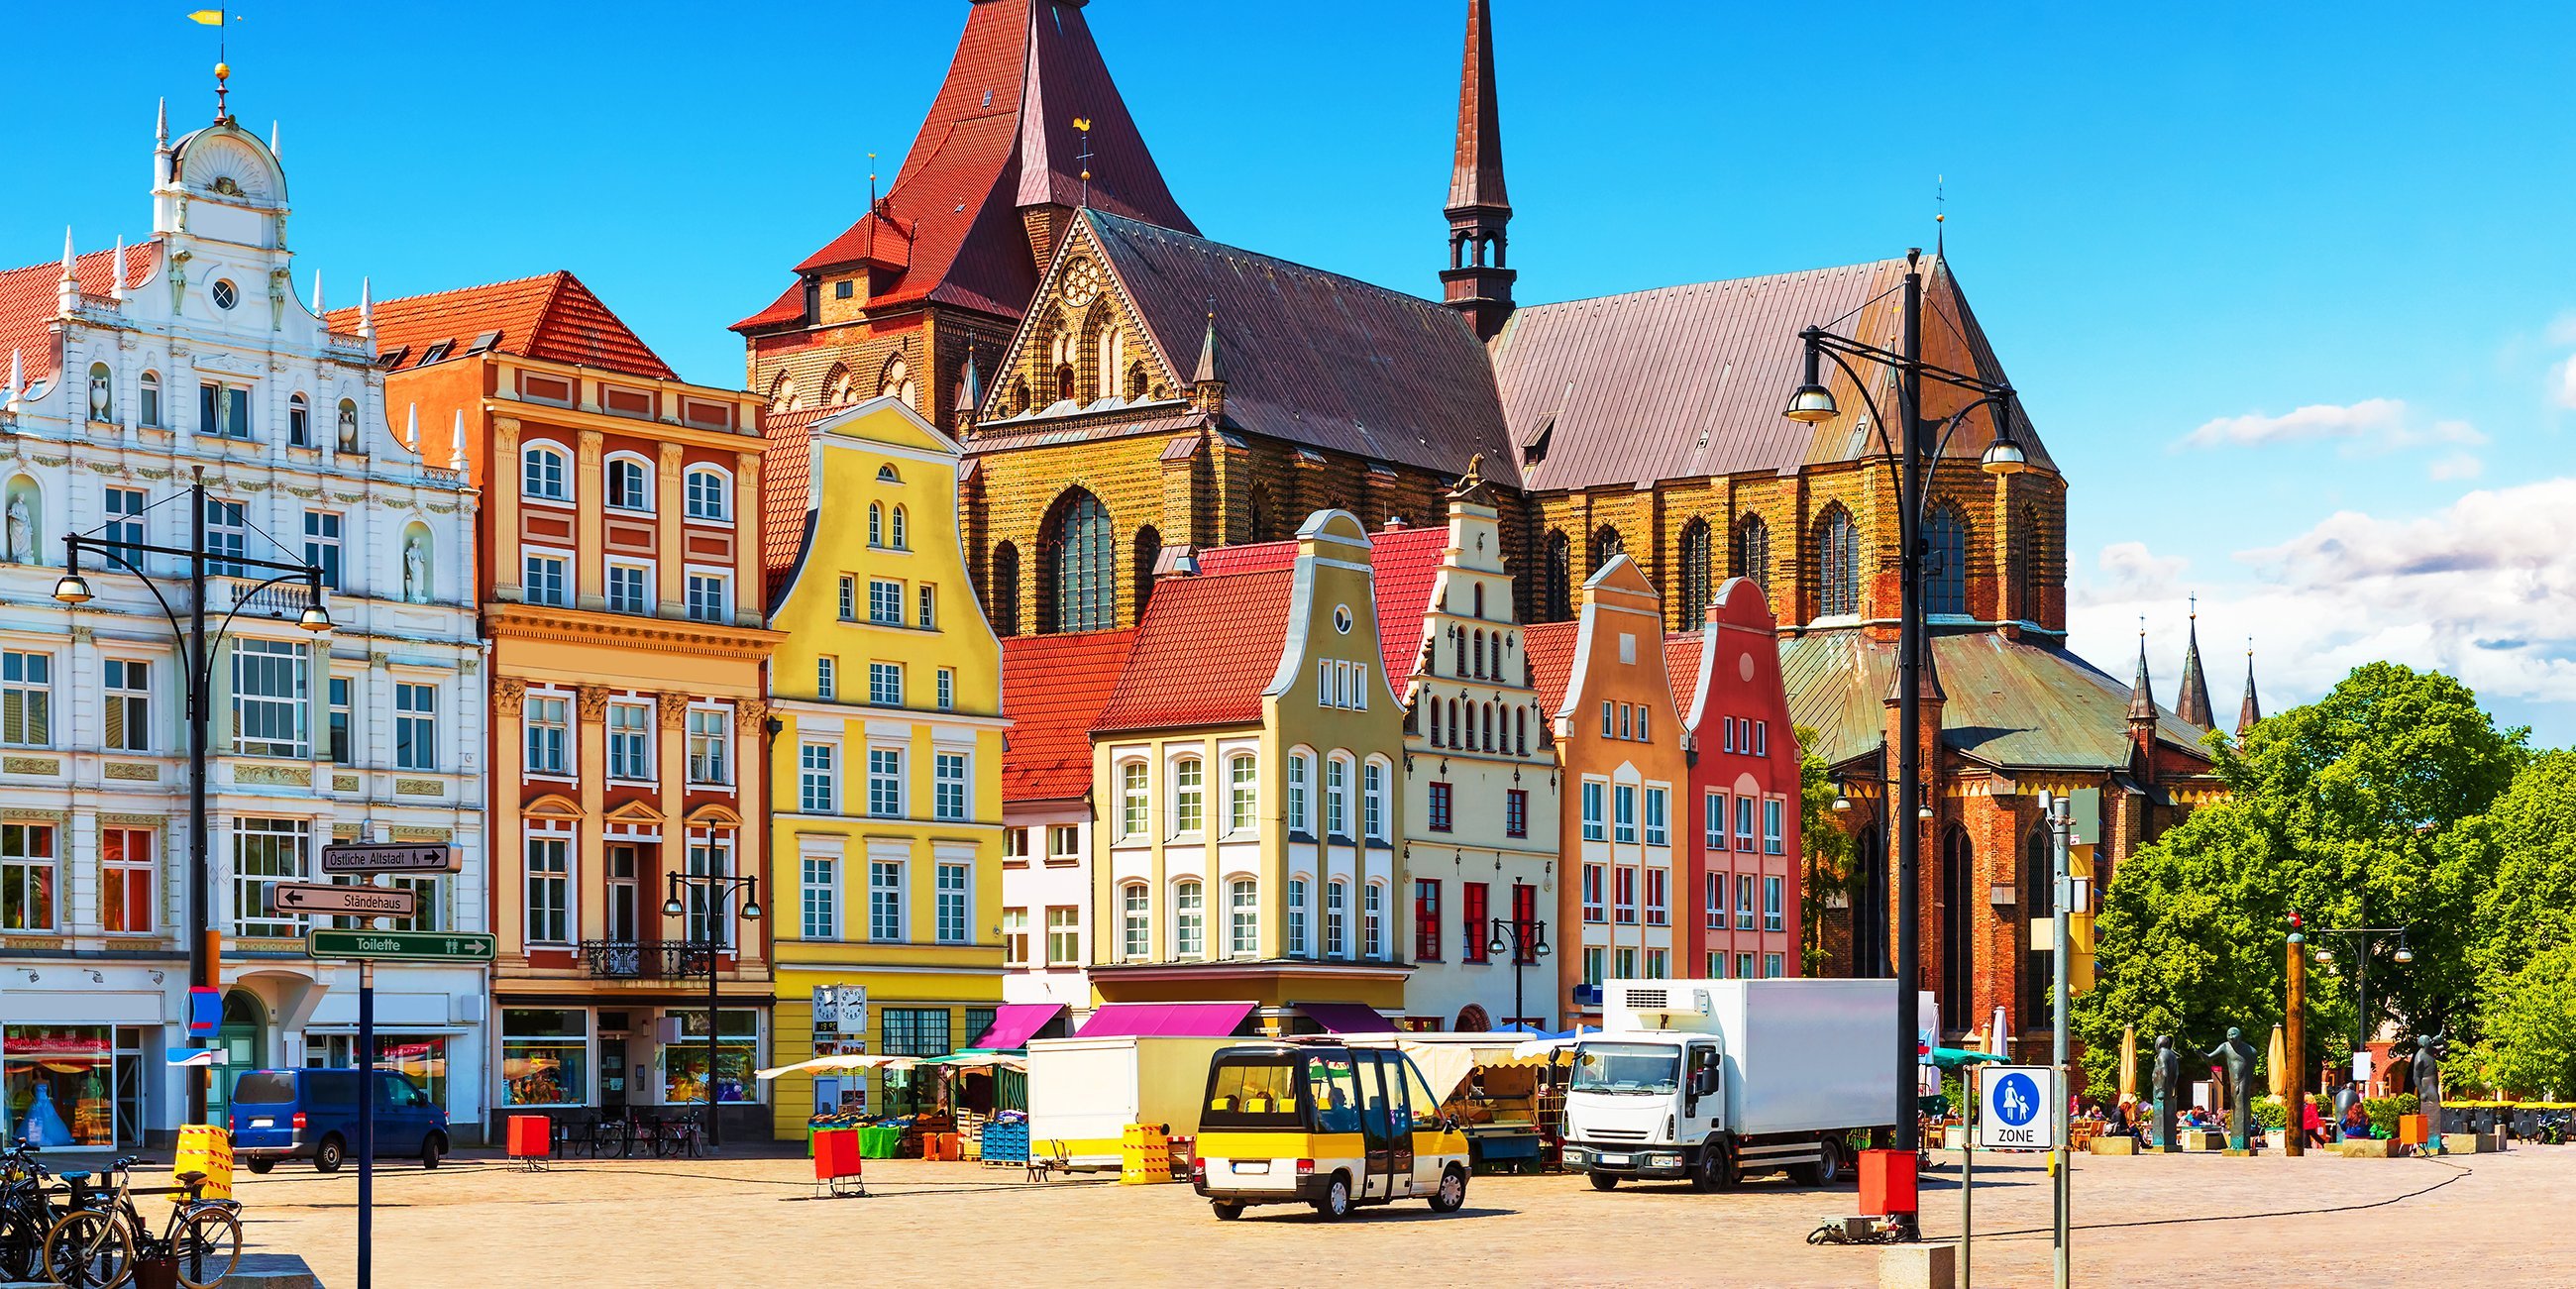 The image shows buidlgins of Rostock city in Germany